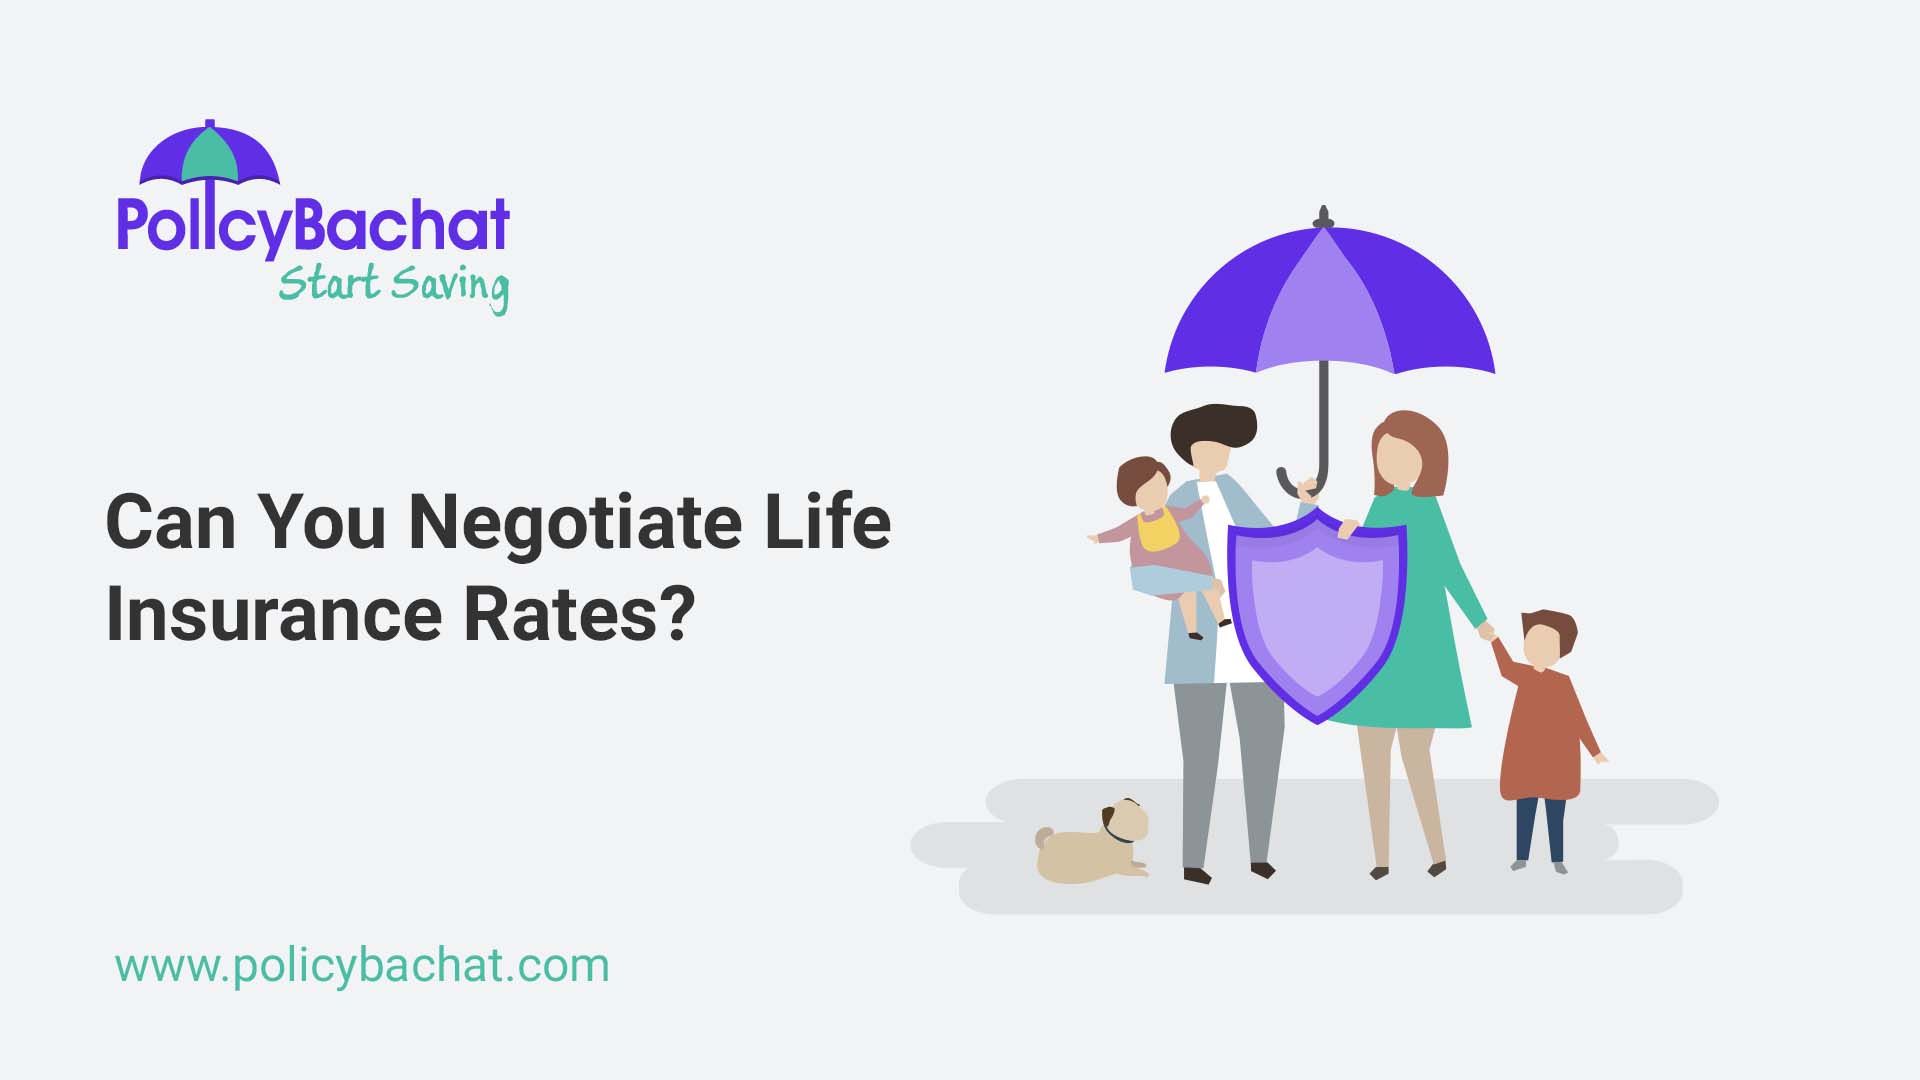 Can You Negotiate Life Insurance Premiums?